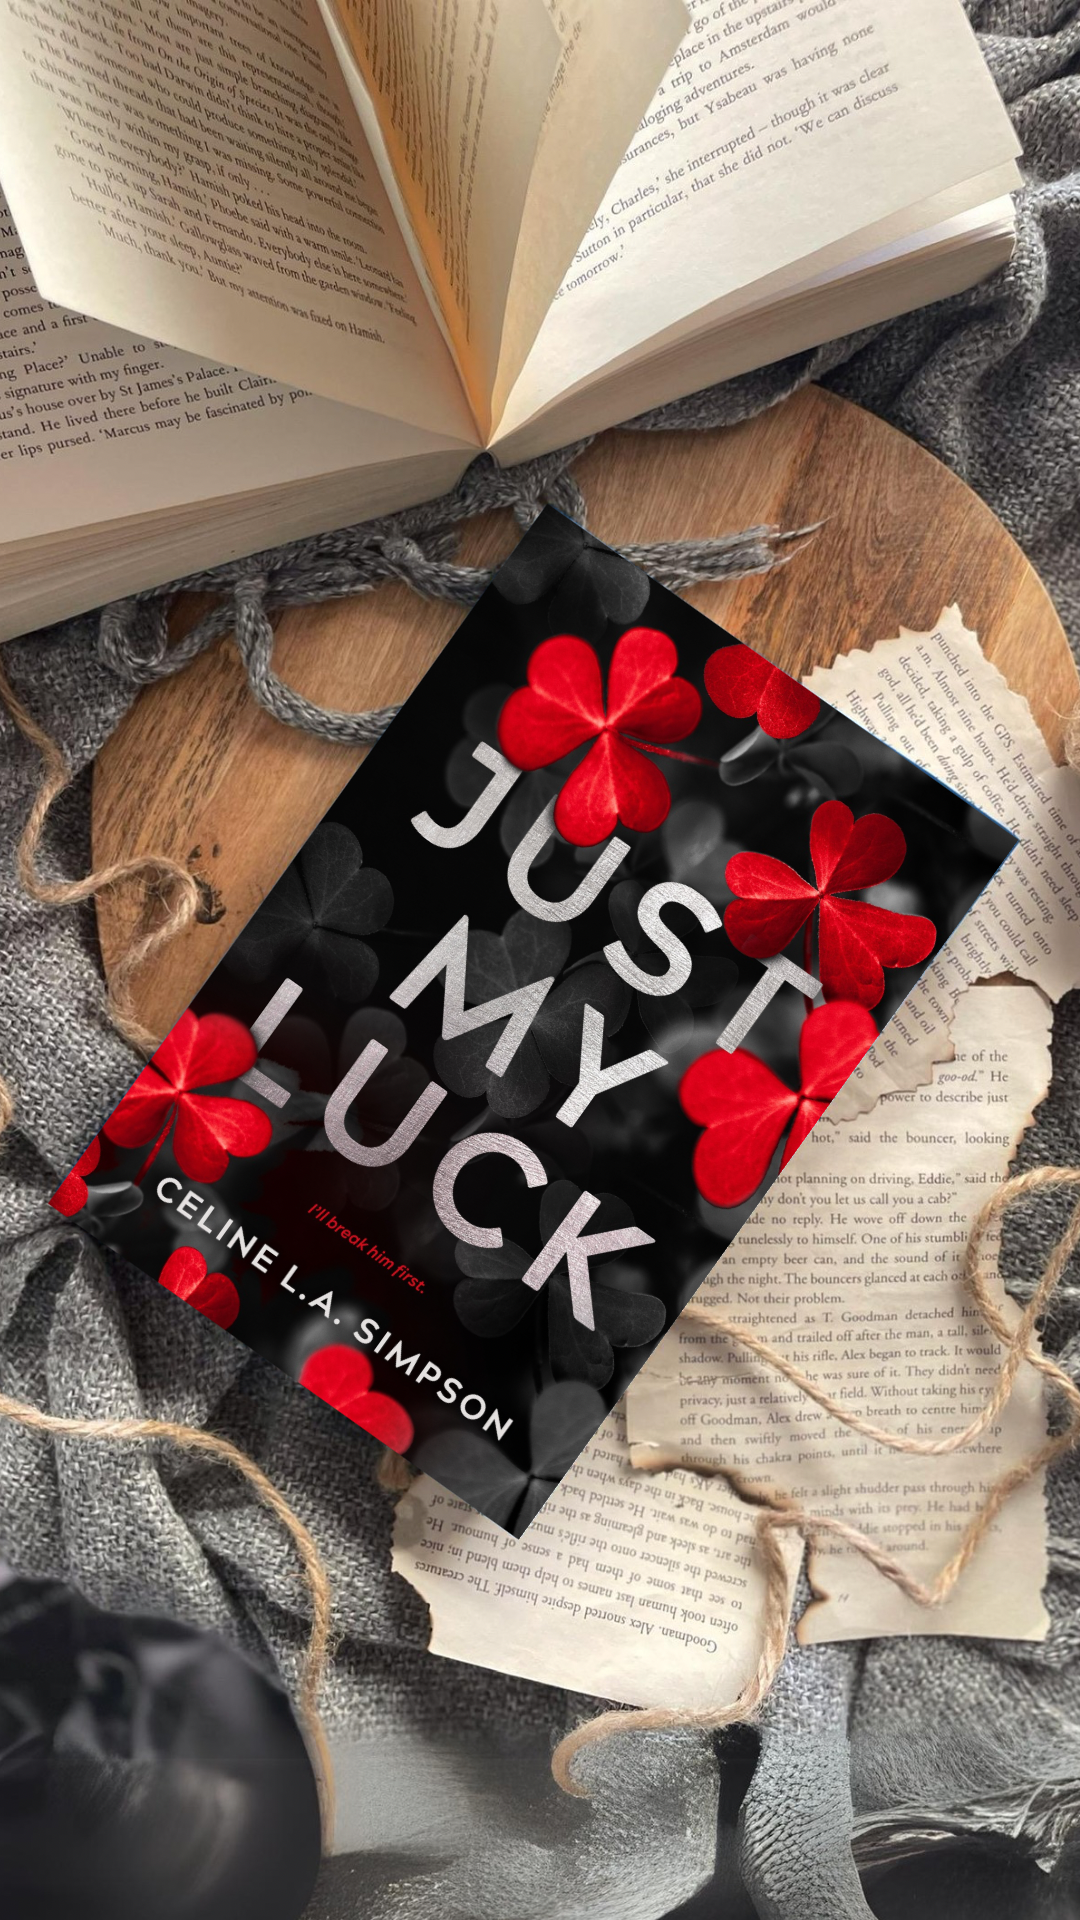 (F&F PREORDER) Just My Luck: A new steaming hot dark, dirty, witty 'enemies-to-lovers' romance by Celine L.A. Simpson